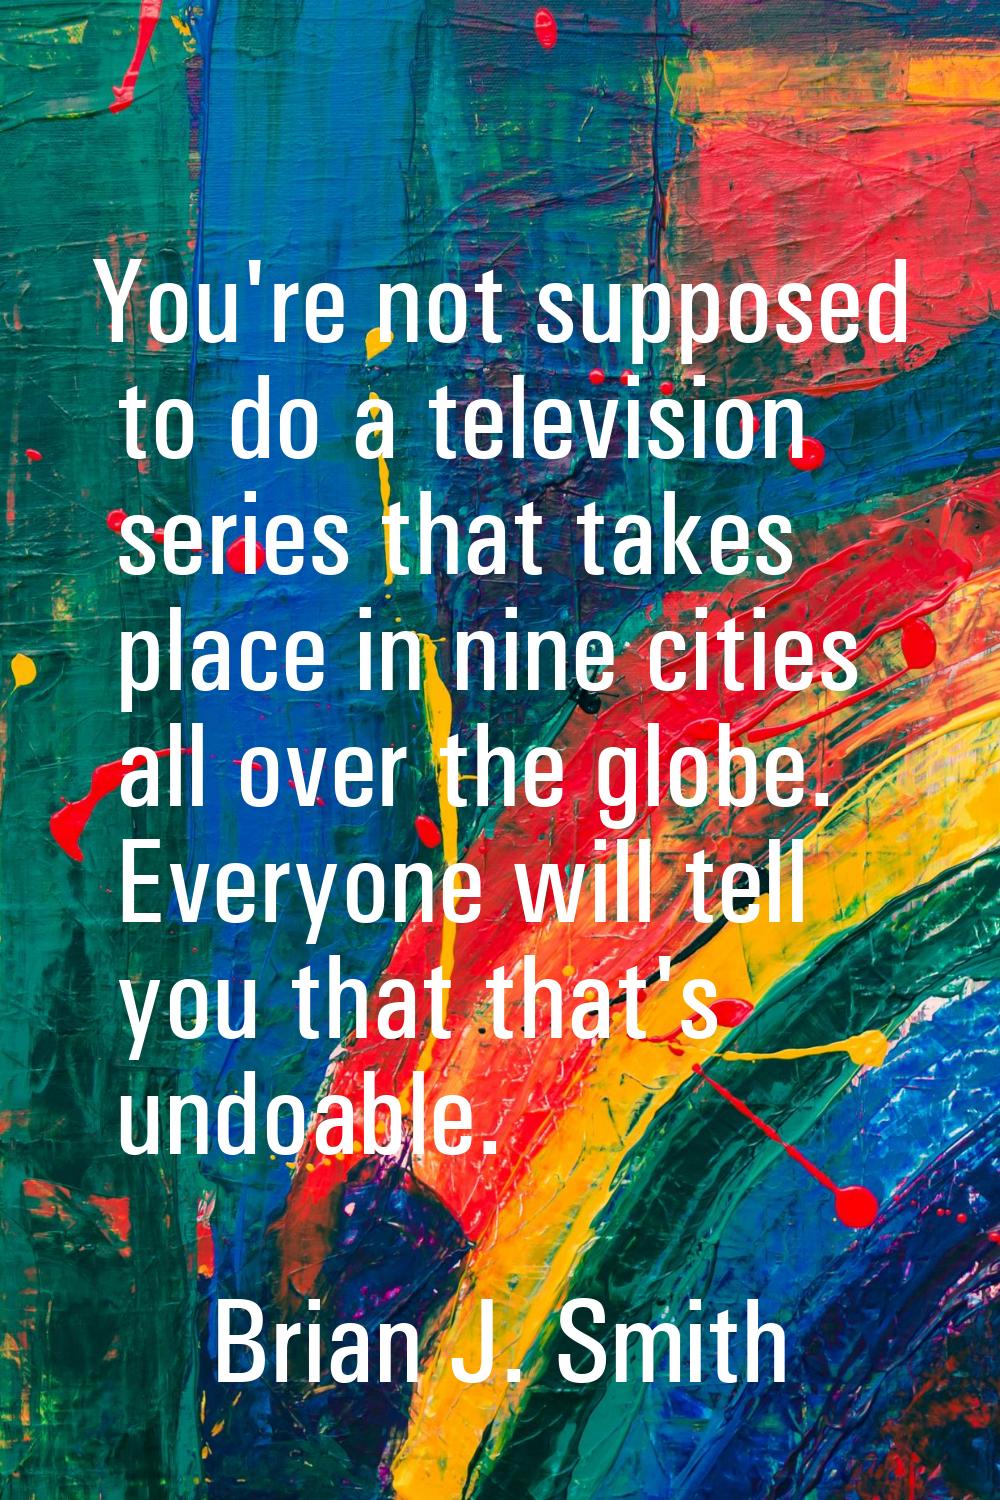 You're not supposed to do a television series that takes place in nine cities all over the globe. E